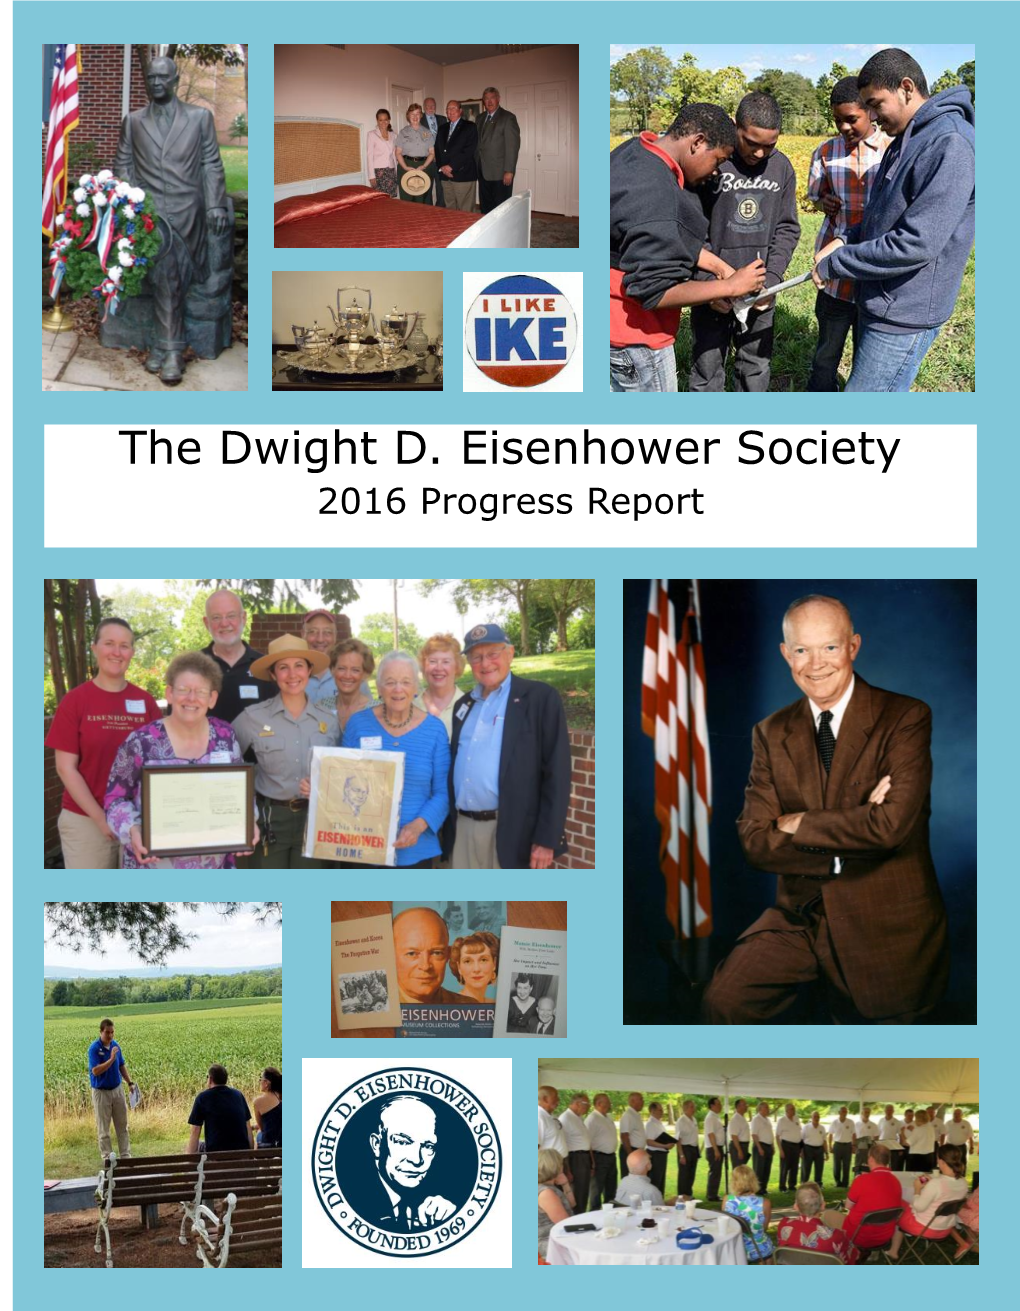 The Dwight D. Eisenhower Society Financial Reports